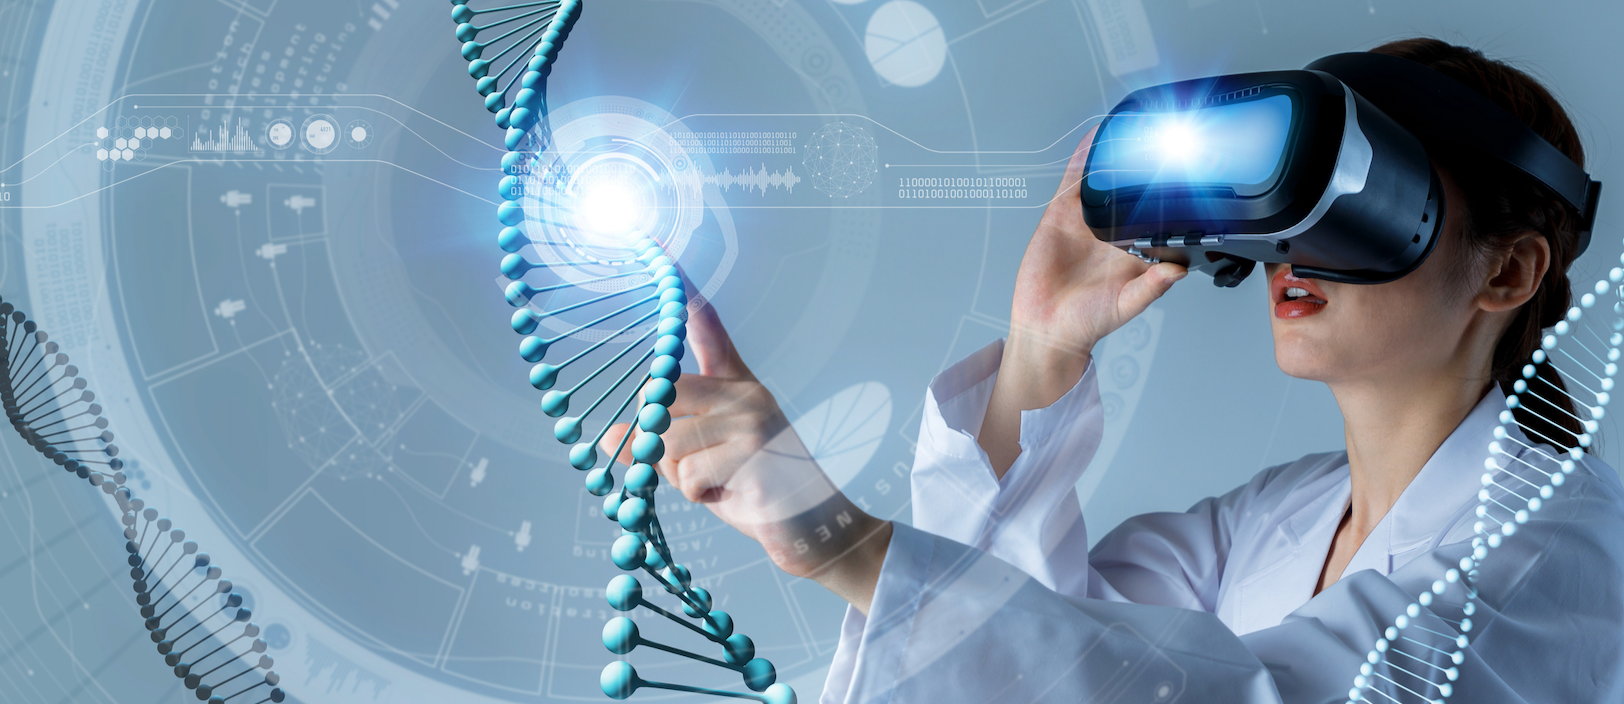 Medical scientist with VR examining DNA strand photography illustration